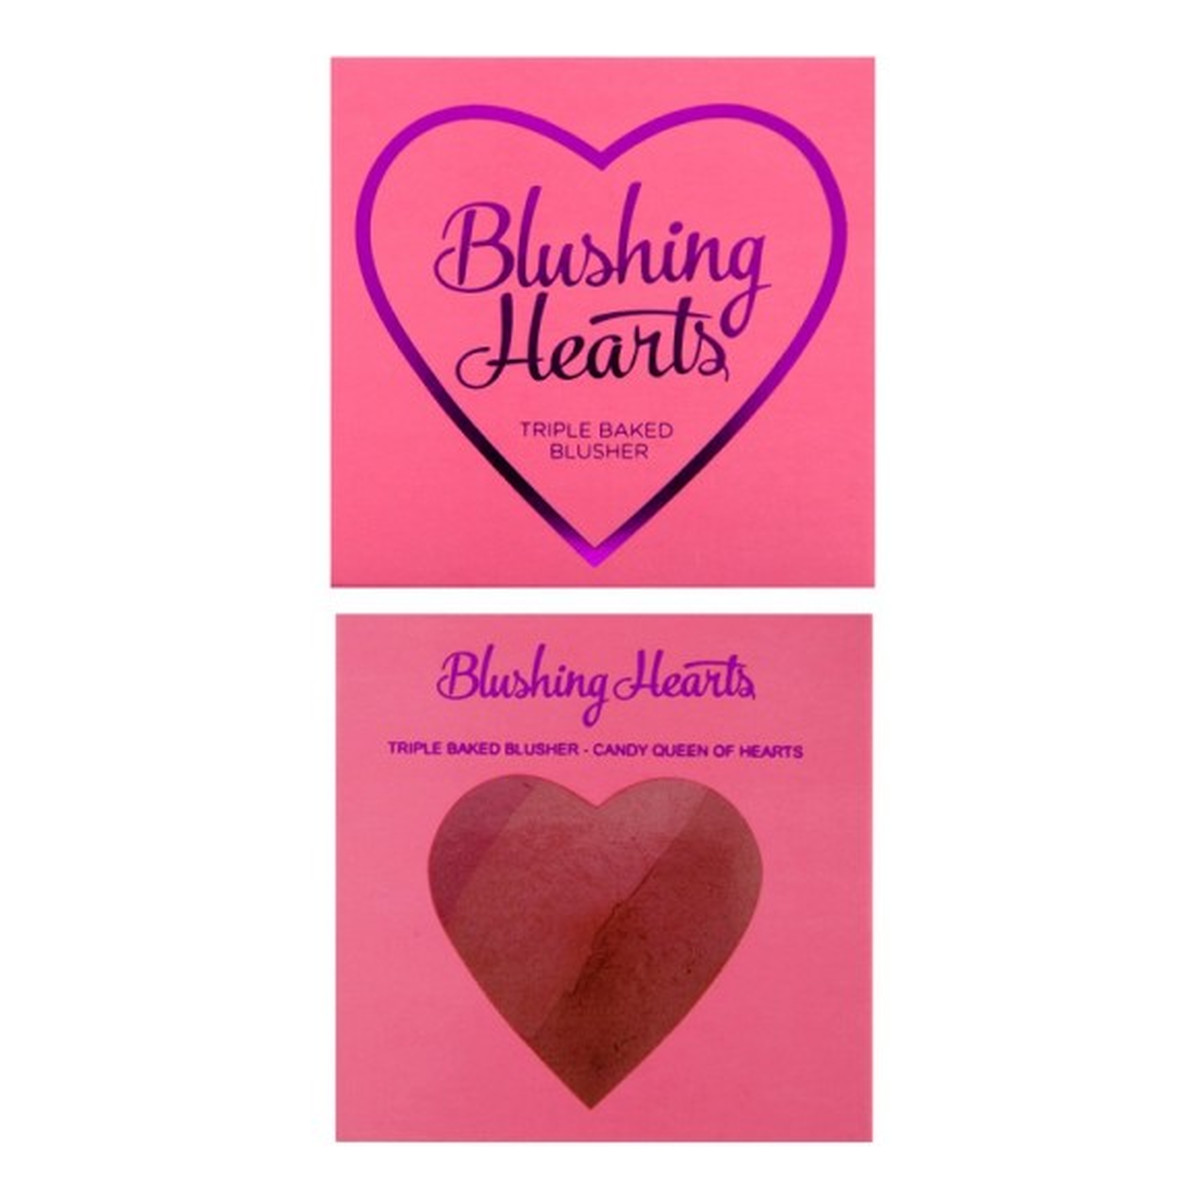 Makeup Revolution Blushing Hearts Candy Queen of Hearts Róż Do Policzków 10g